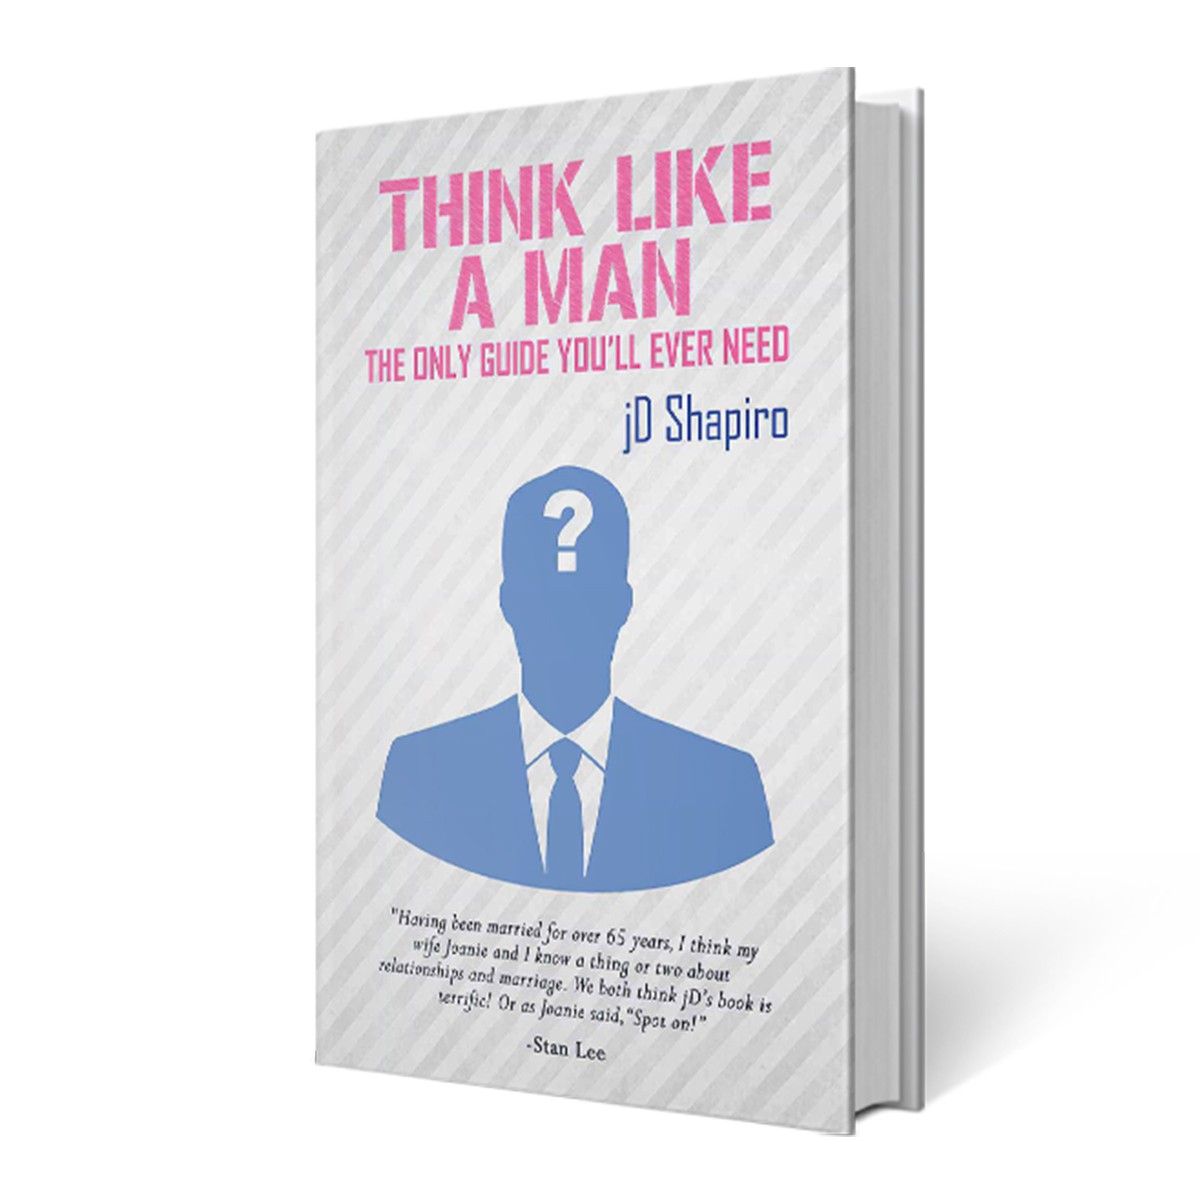 Electric Press Magazine Featured the Book Think Like a Man by jD Shapiro